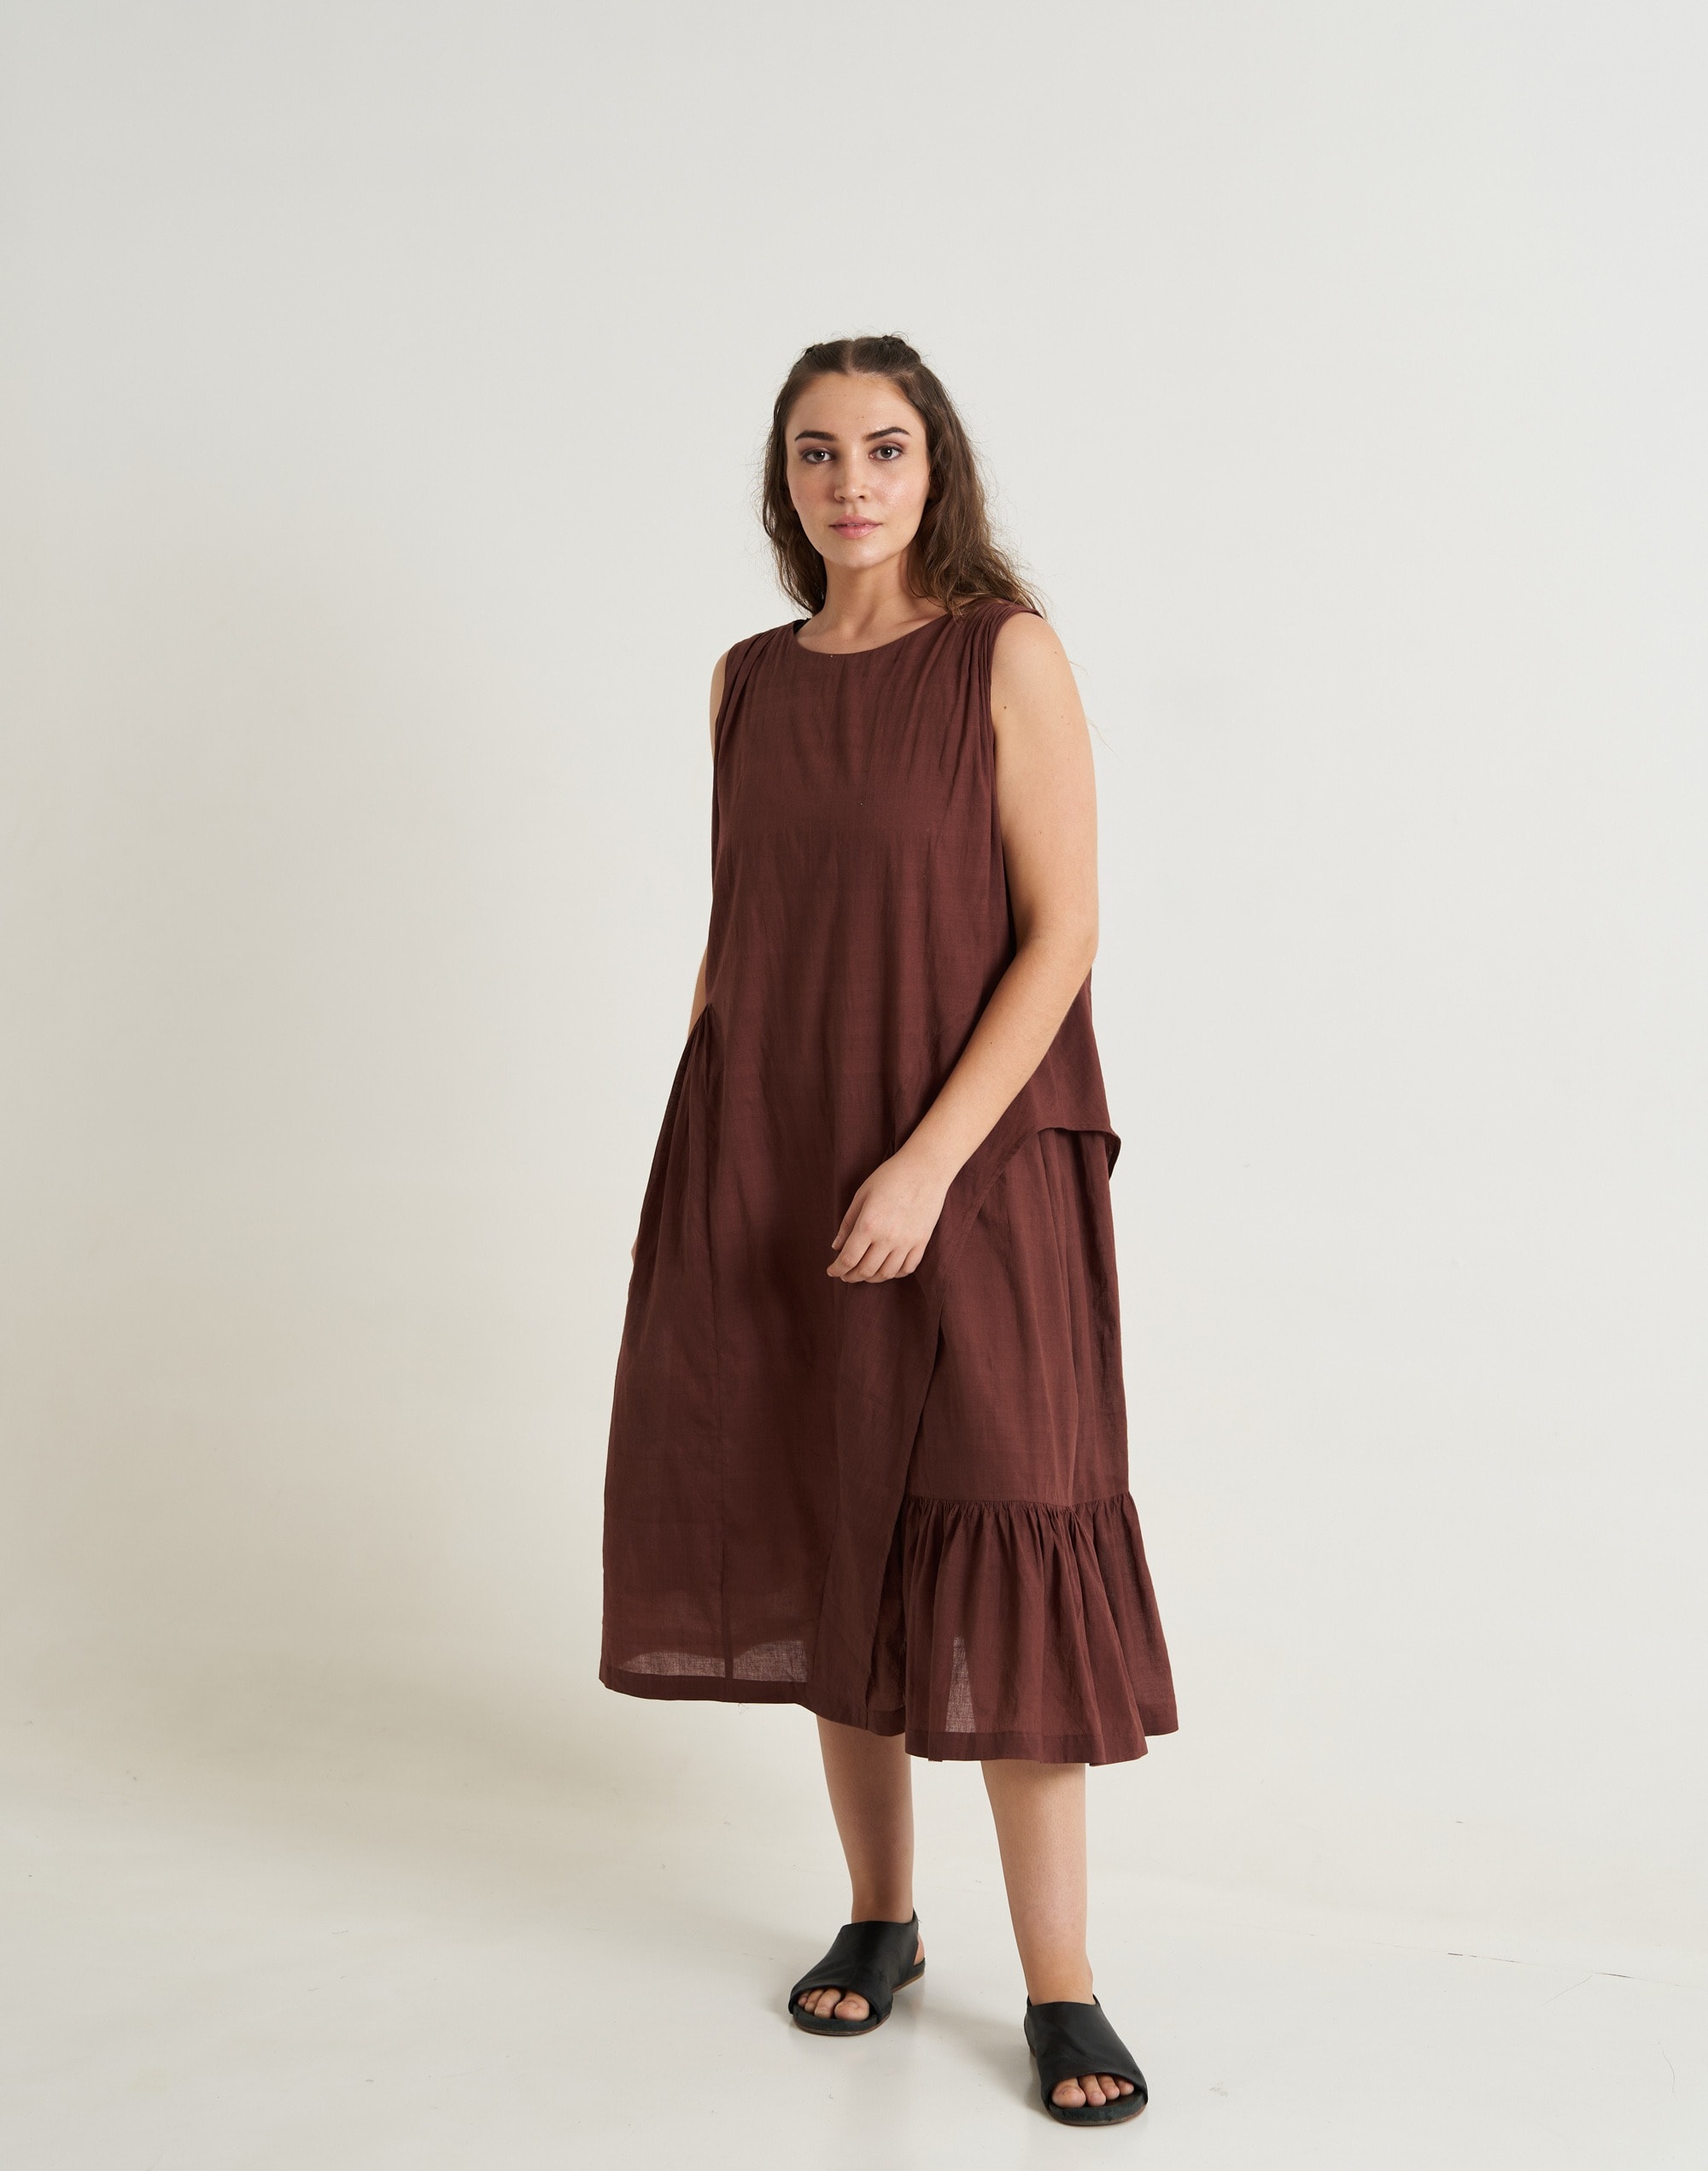 World of Crow Cocoa Brown Pleated Twirl Dress